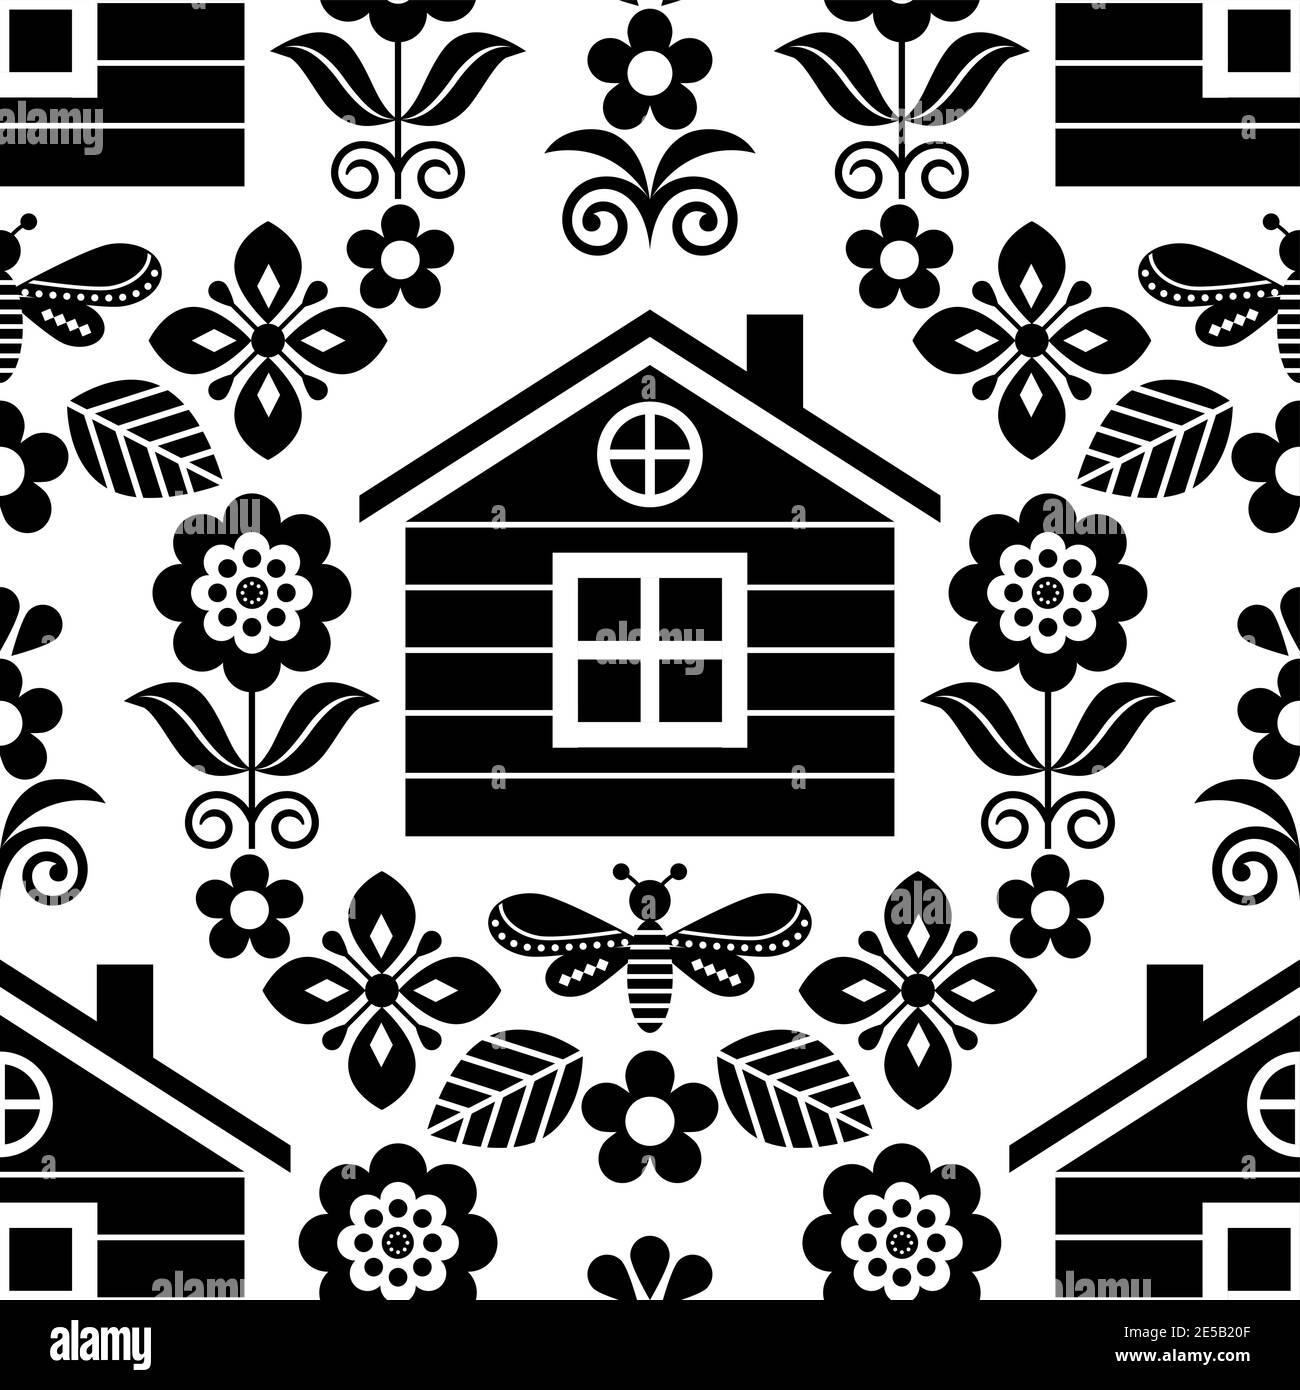 Scandinavian folk art seamless vector floral pattern with Finnish or Norwegian house, textile design with flowers in black and white Stock Vector